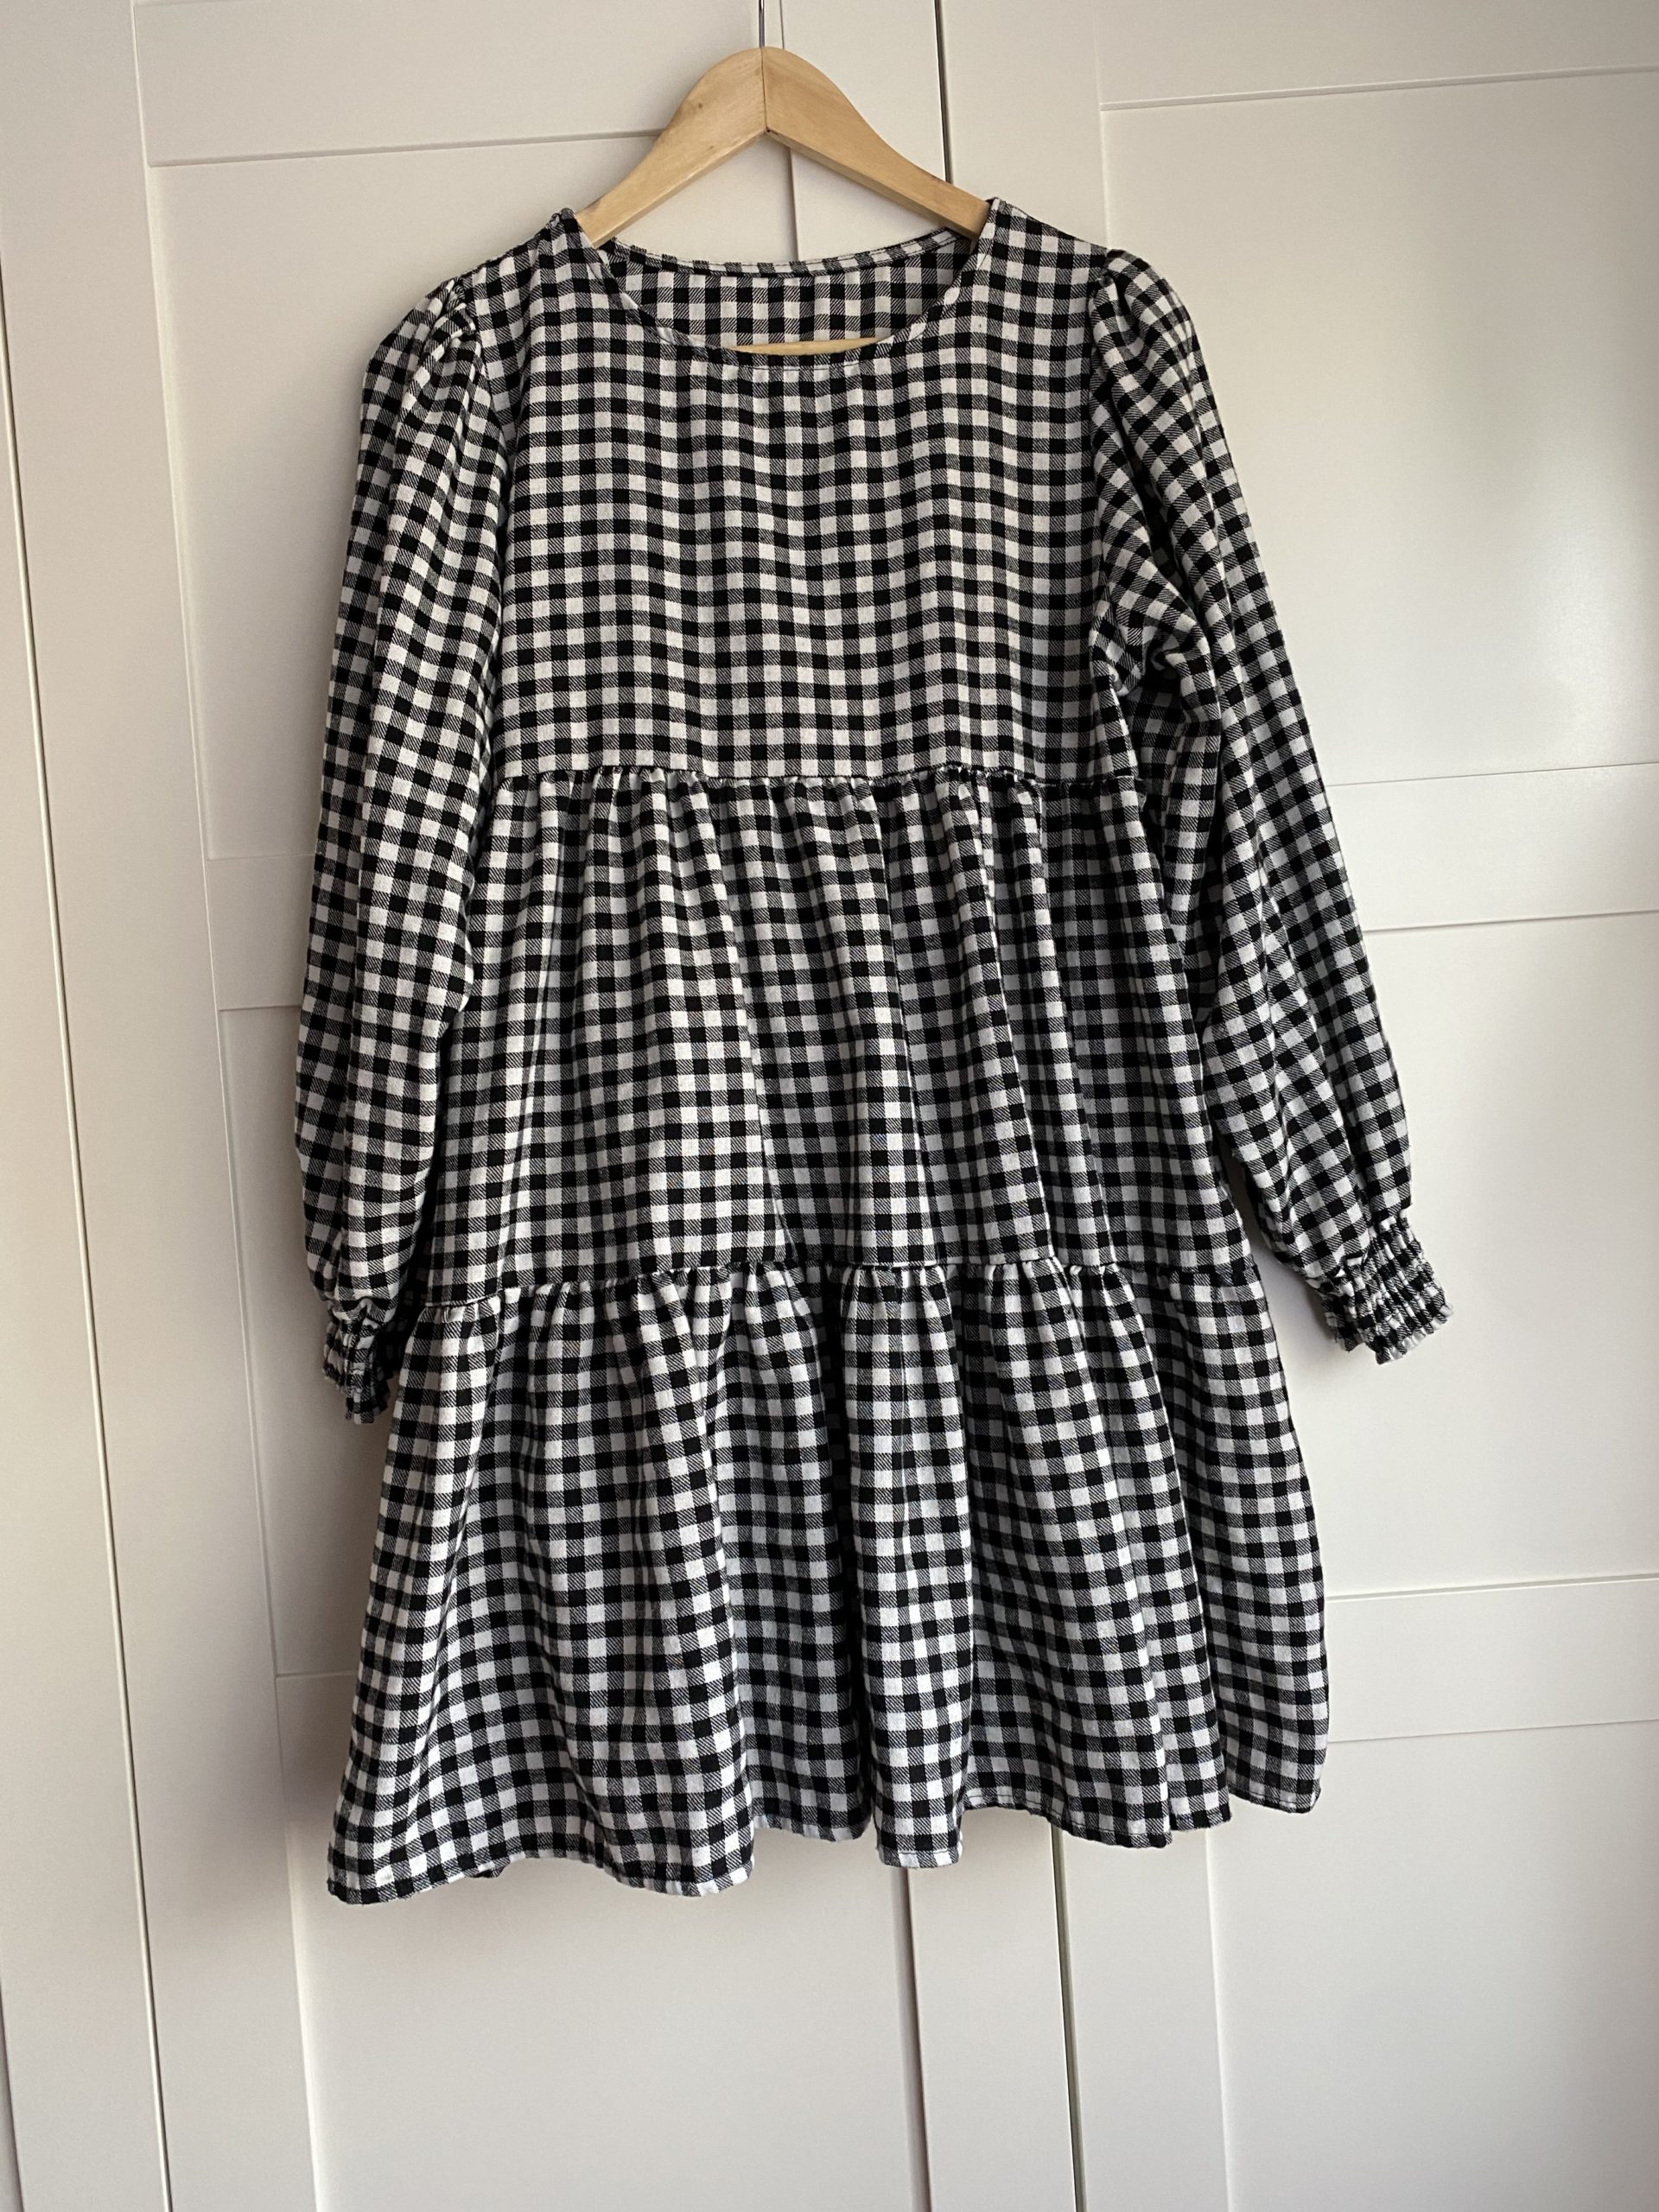 CHECK dress with A Ruffle - Just Love By O&A